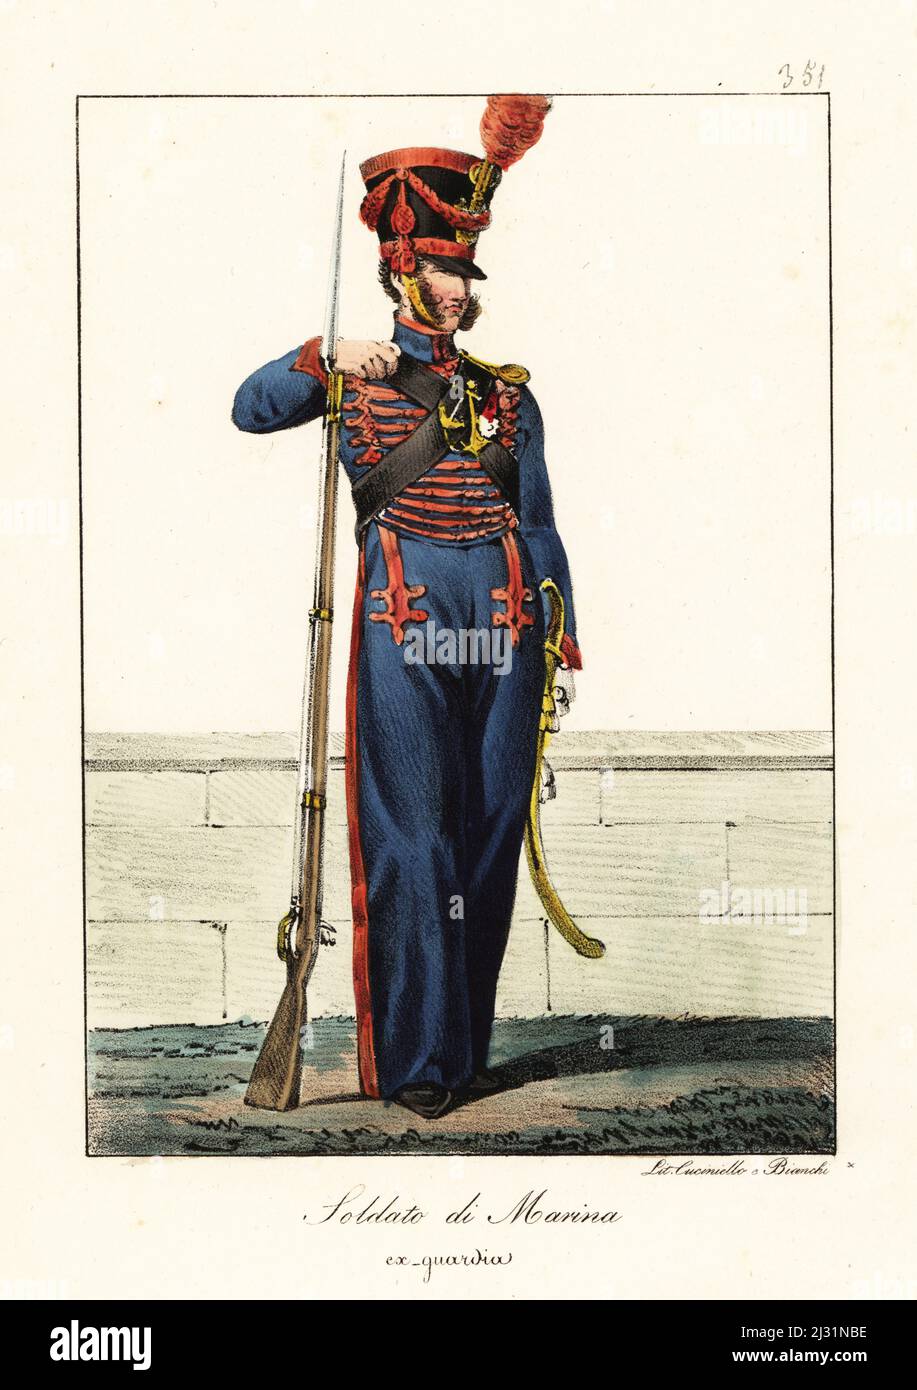 Uniform of a French Marine, Napoleon's army. In shako helmet with brush, blue uniform with scarlet frogging, armed with musket and sabre. Marin, ex-Garde. Handcoloured lithograph by Lorenzo Bianchi and Domenico Cuciniello after Hippolyte Lecomte from Costumi civili e militari della monarchia francese dal 1200 al 1820, Naples, 1825. Italian edition of Lecomte’s Civilian and military costumes of the French monarchy from 1200 to 1820. Stock Photo